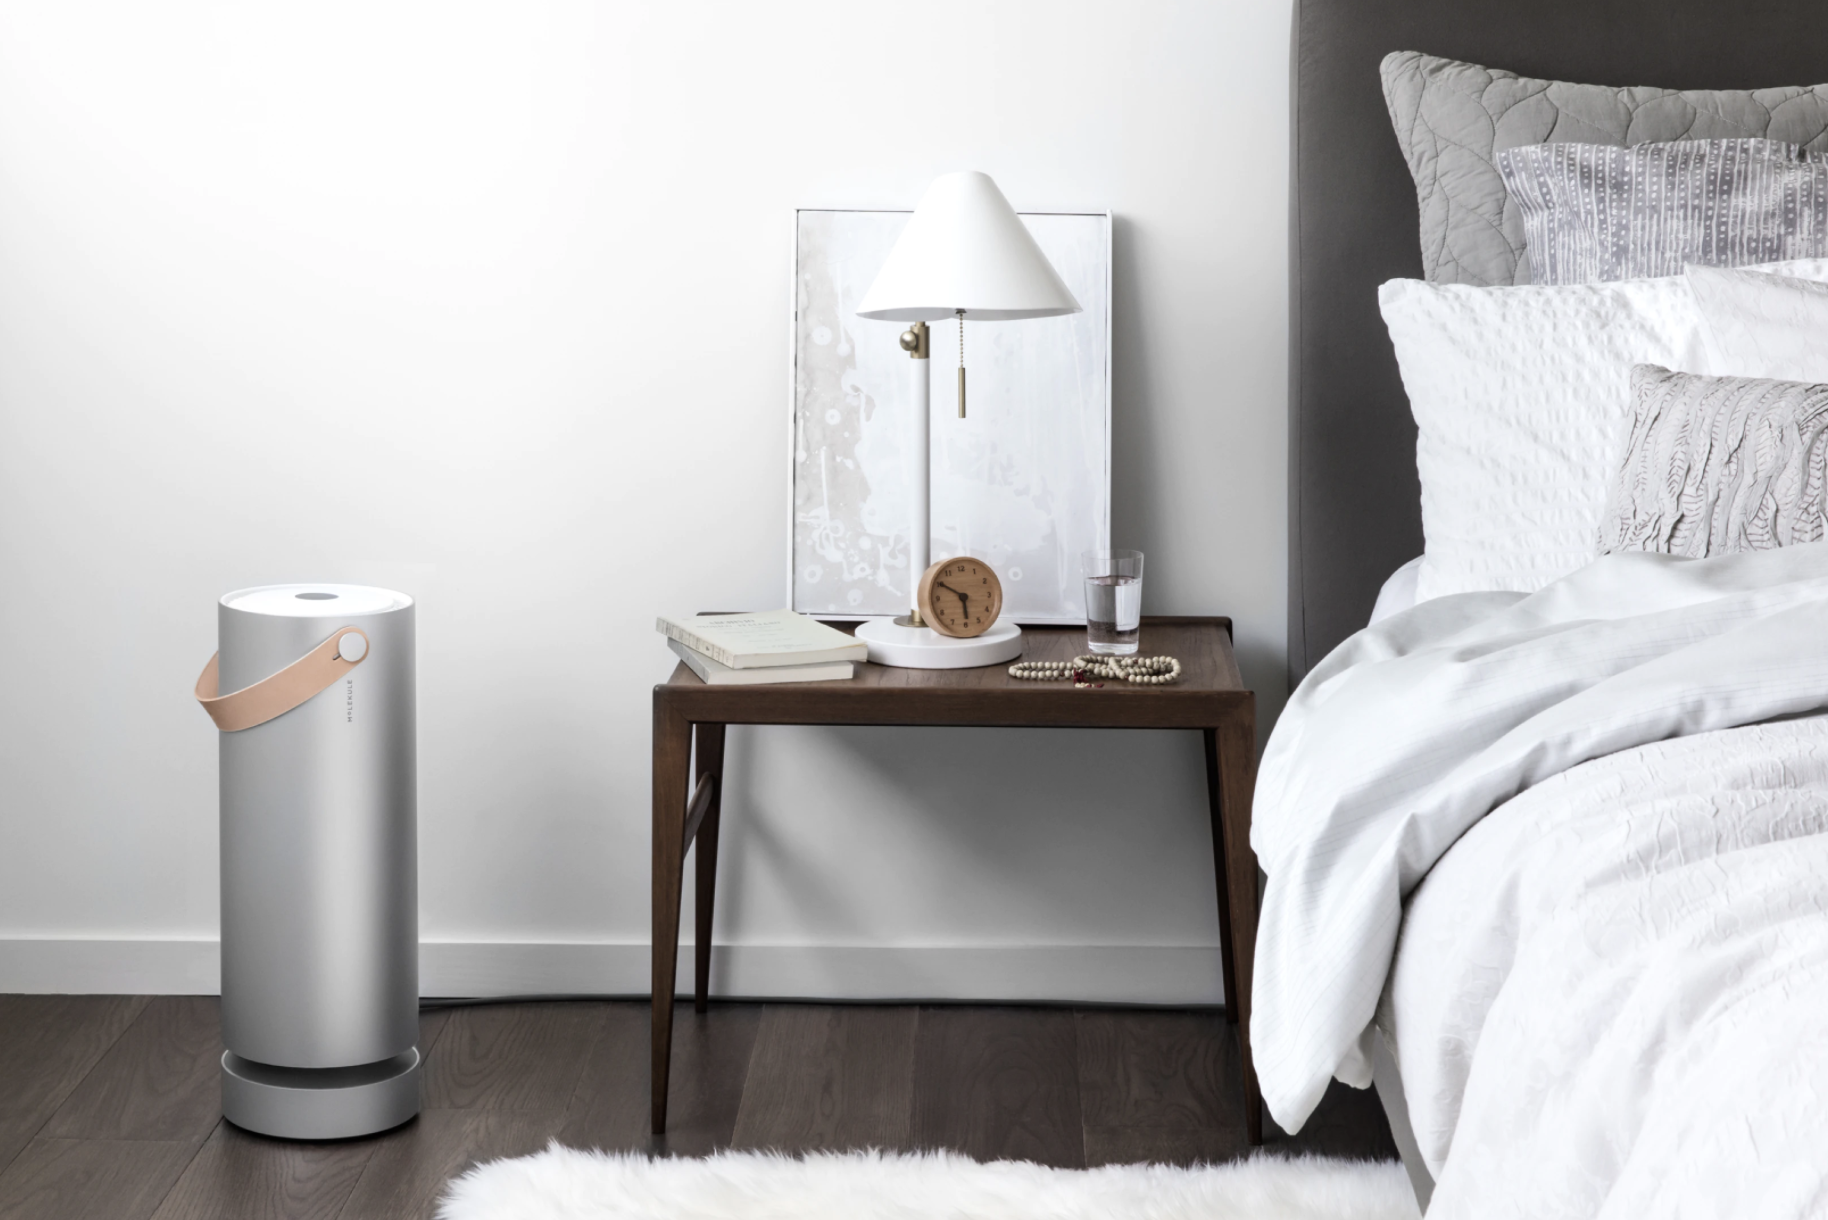 The air purifier beside a bedside table